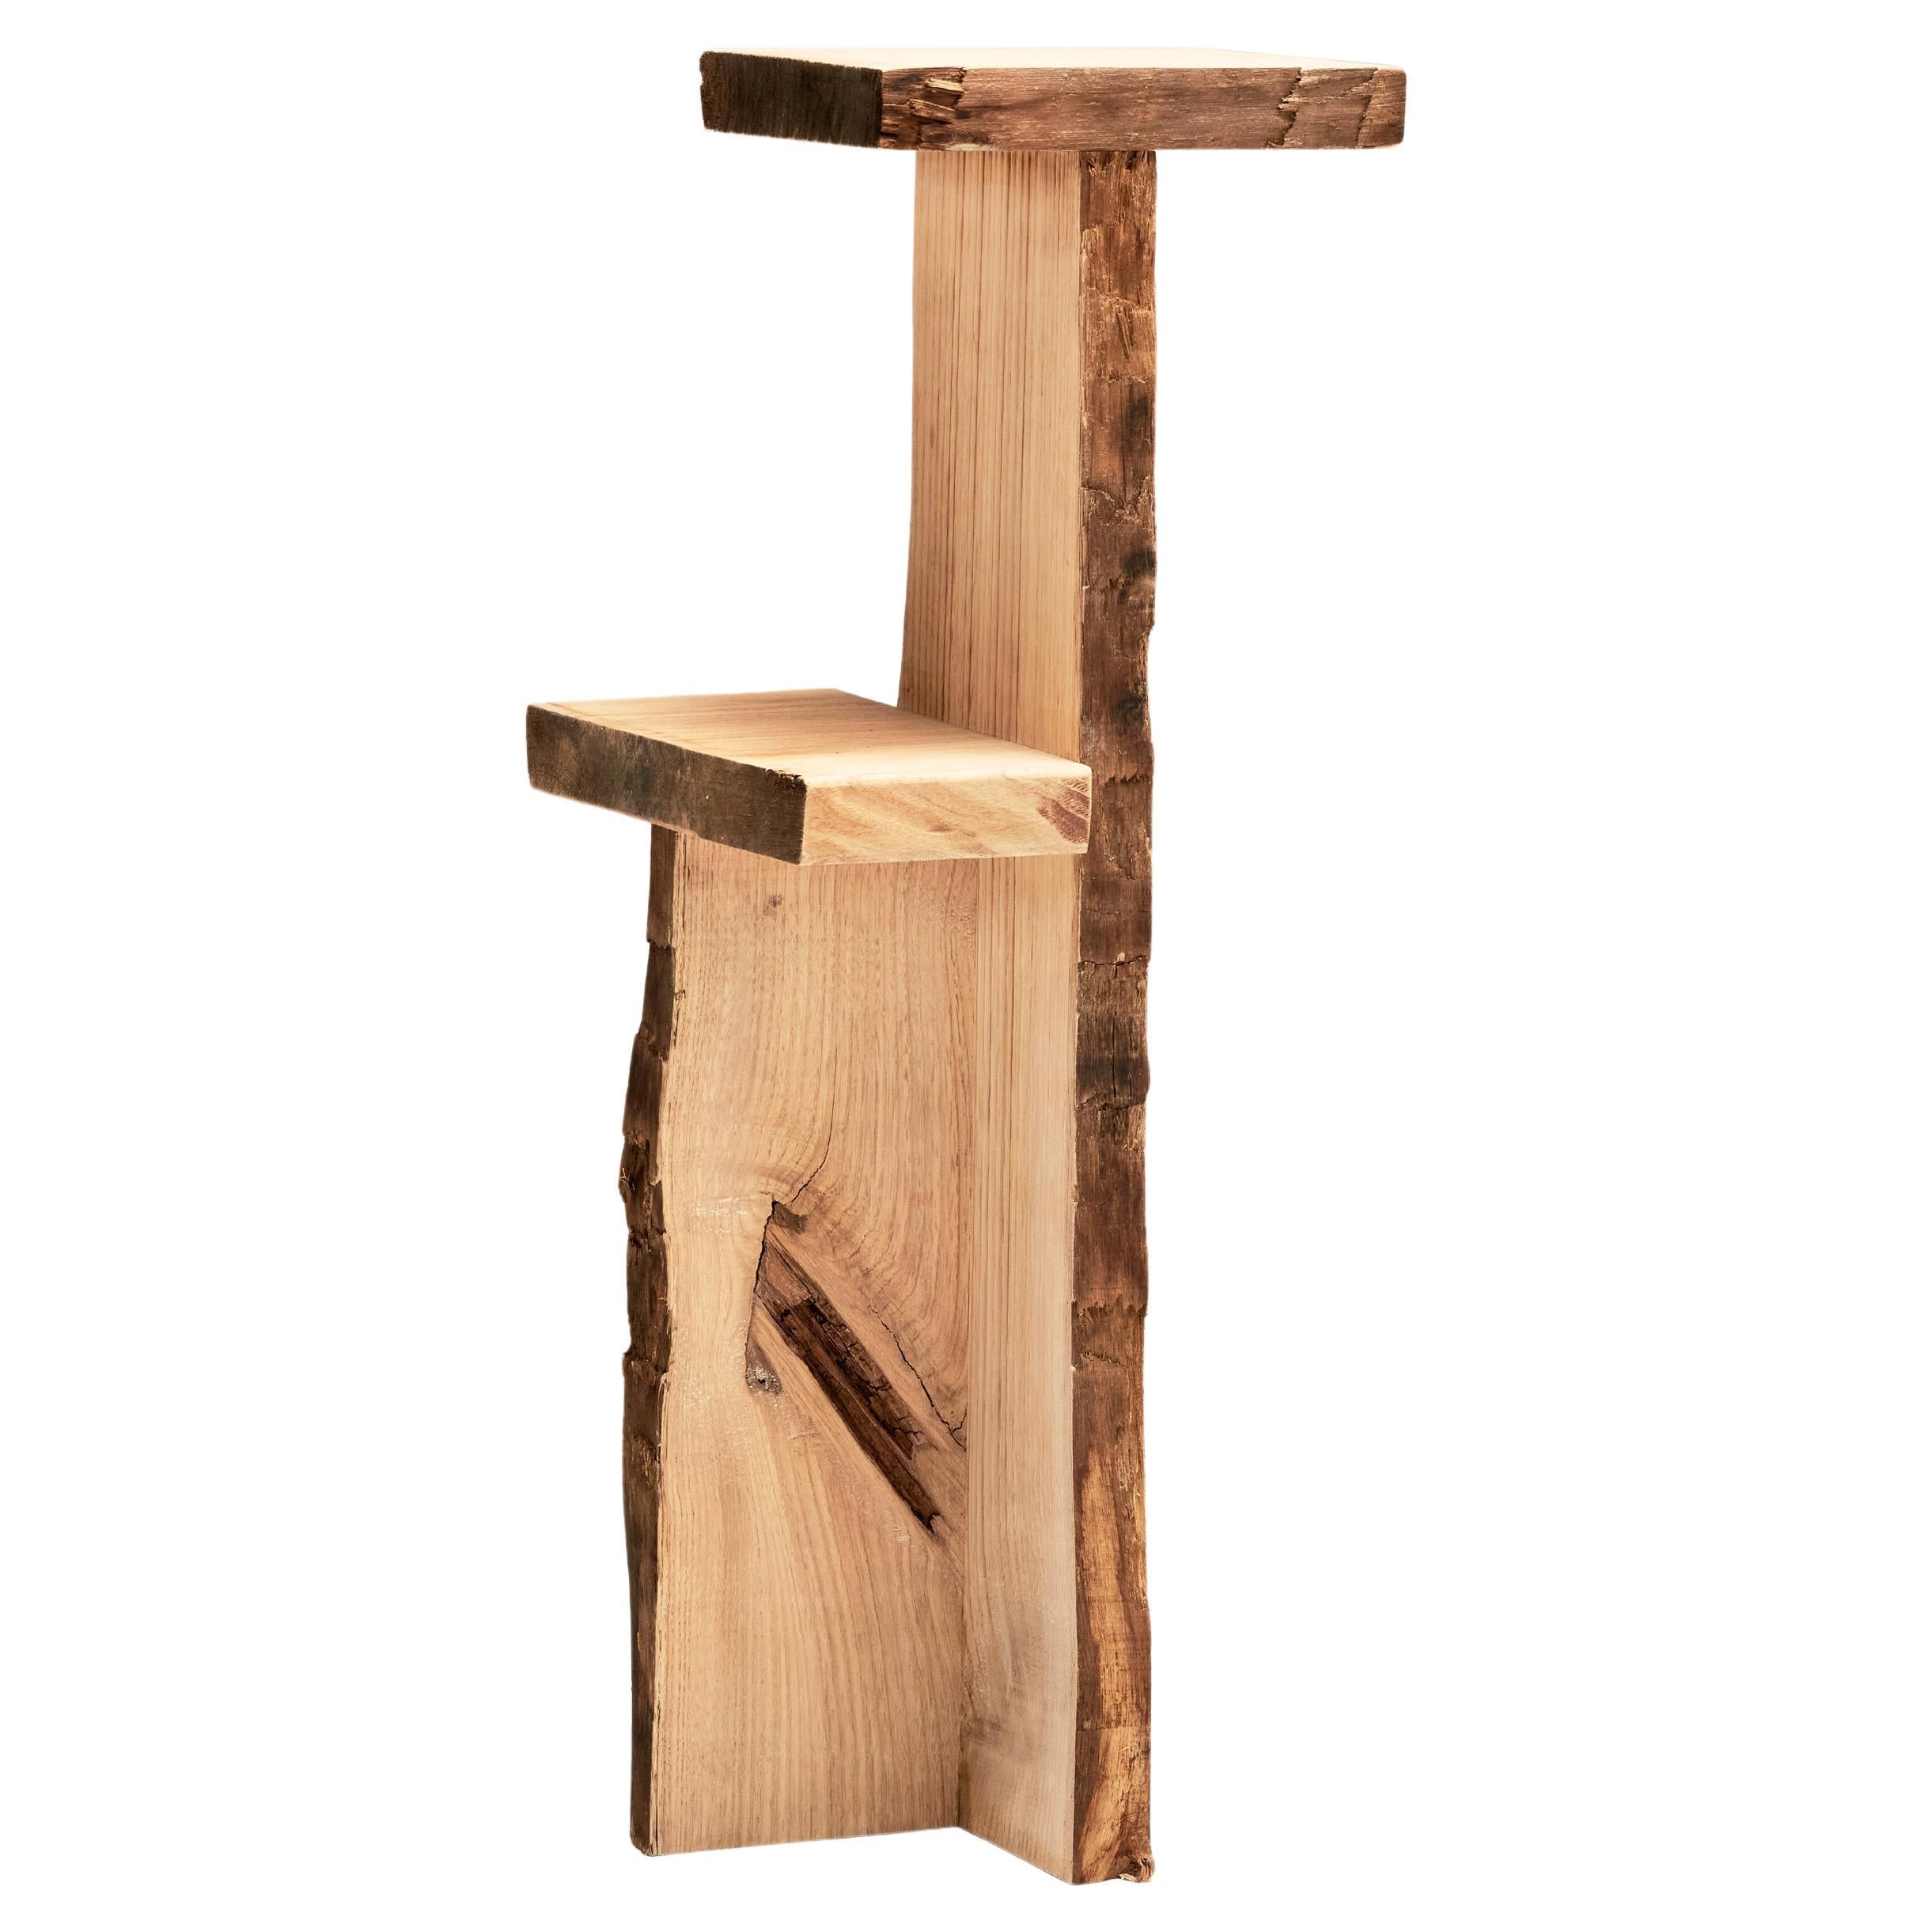 Ripped Wood Double Podium by Willem Van Hooff